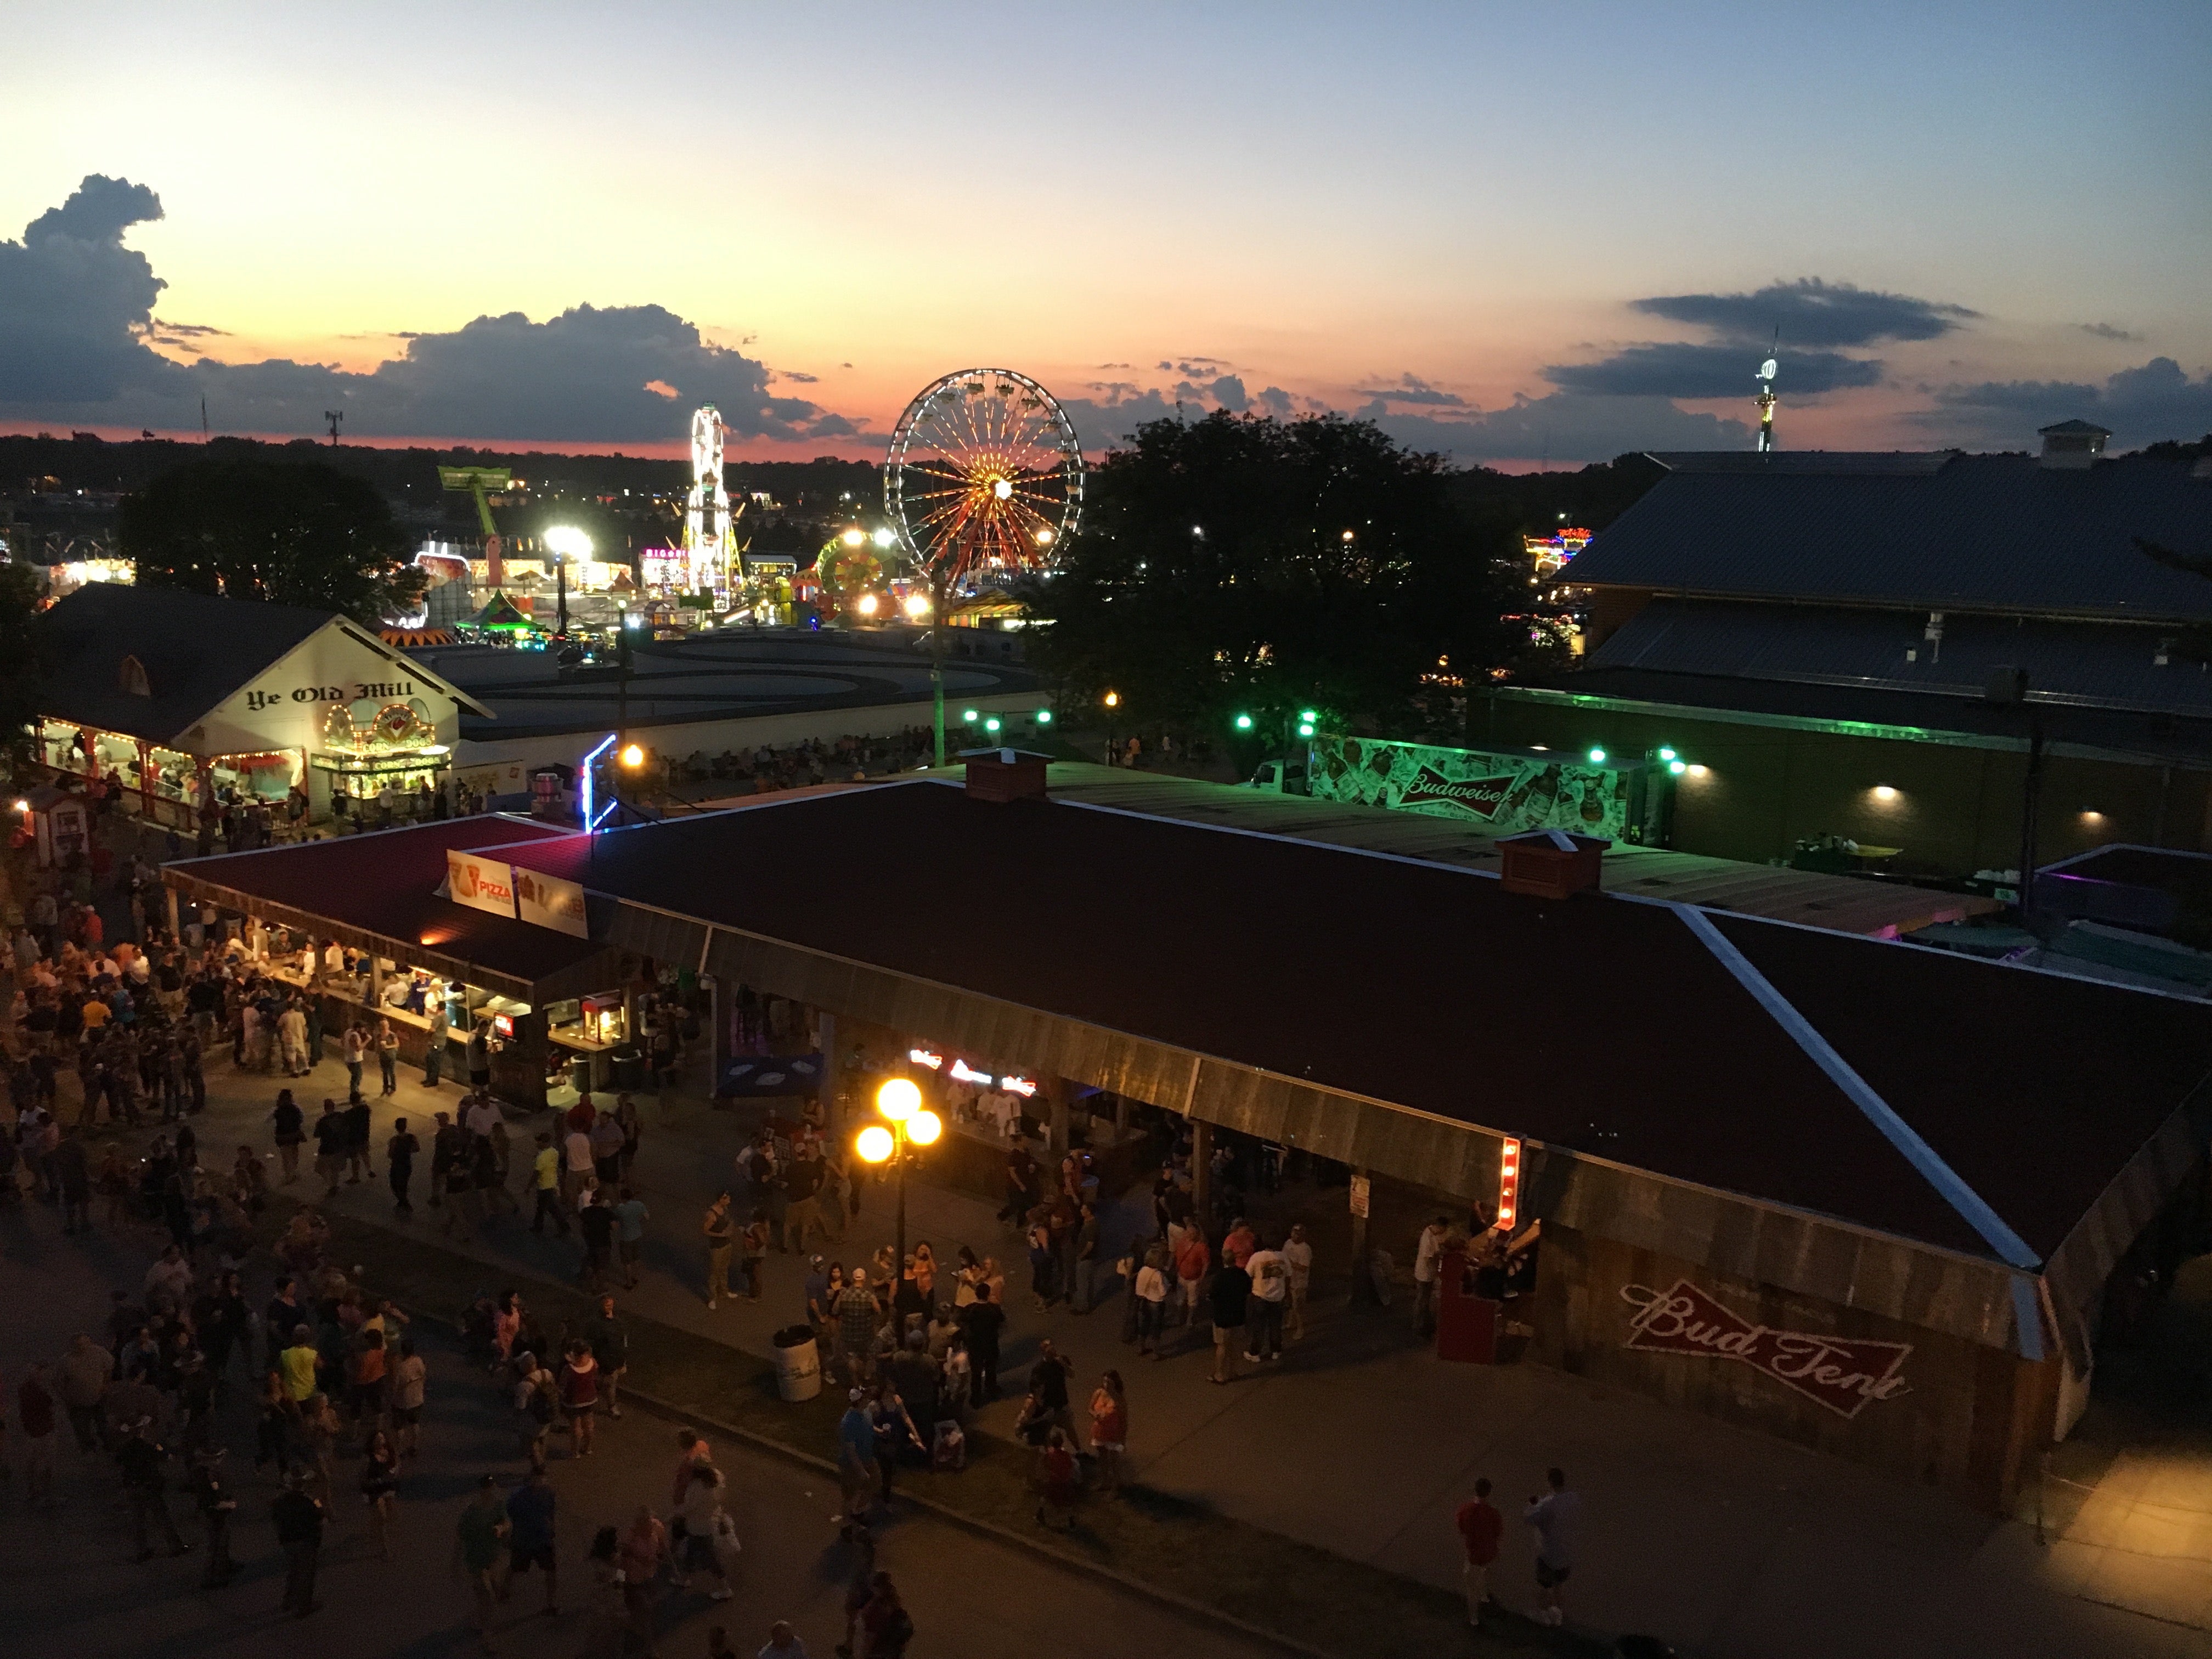 Iowa State Fair Sky Glider view of the rides and Ferris Wheel